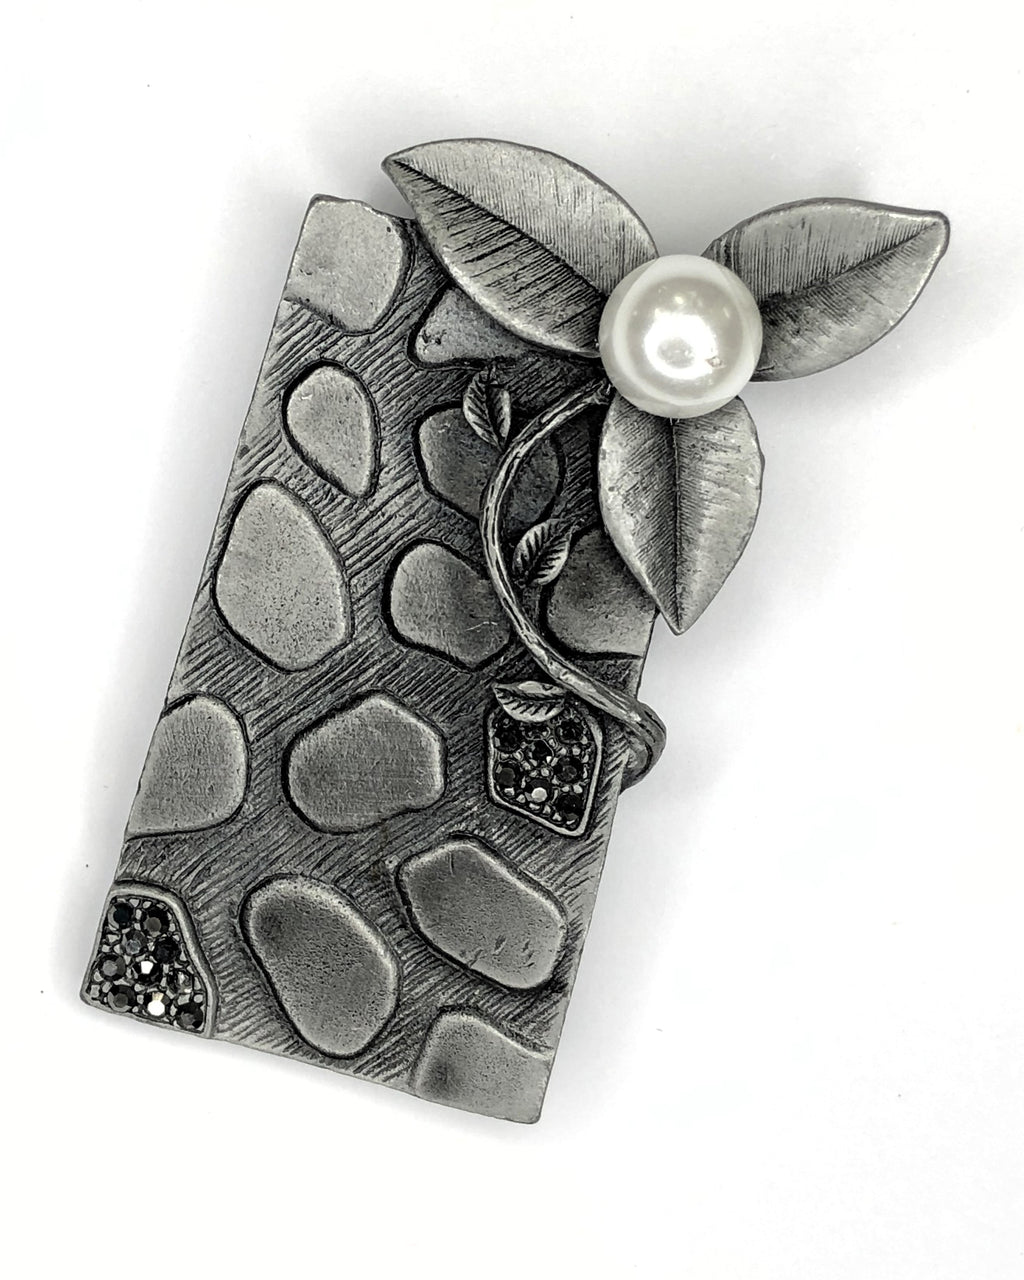 Pearl & leaf with marcasite and brushed metal plate brooch at erika